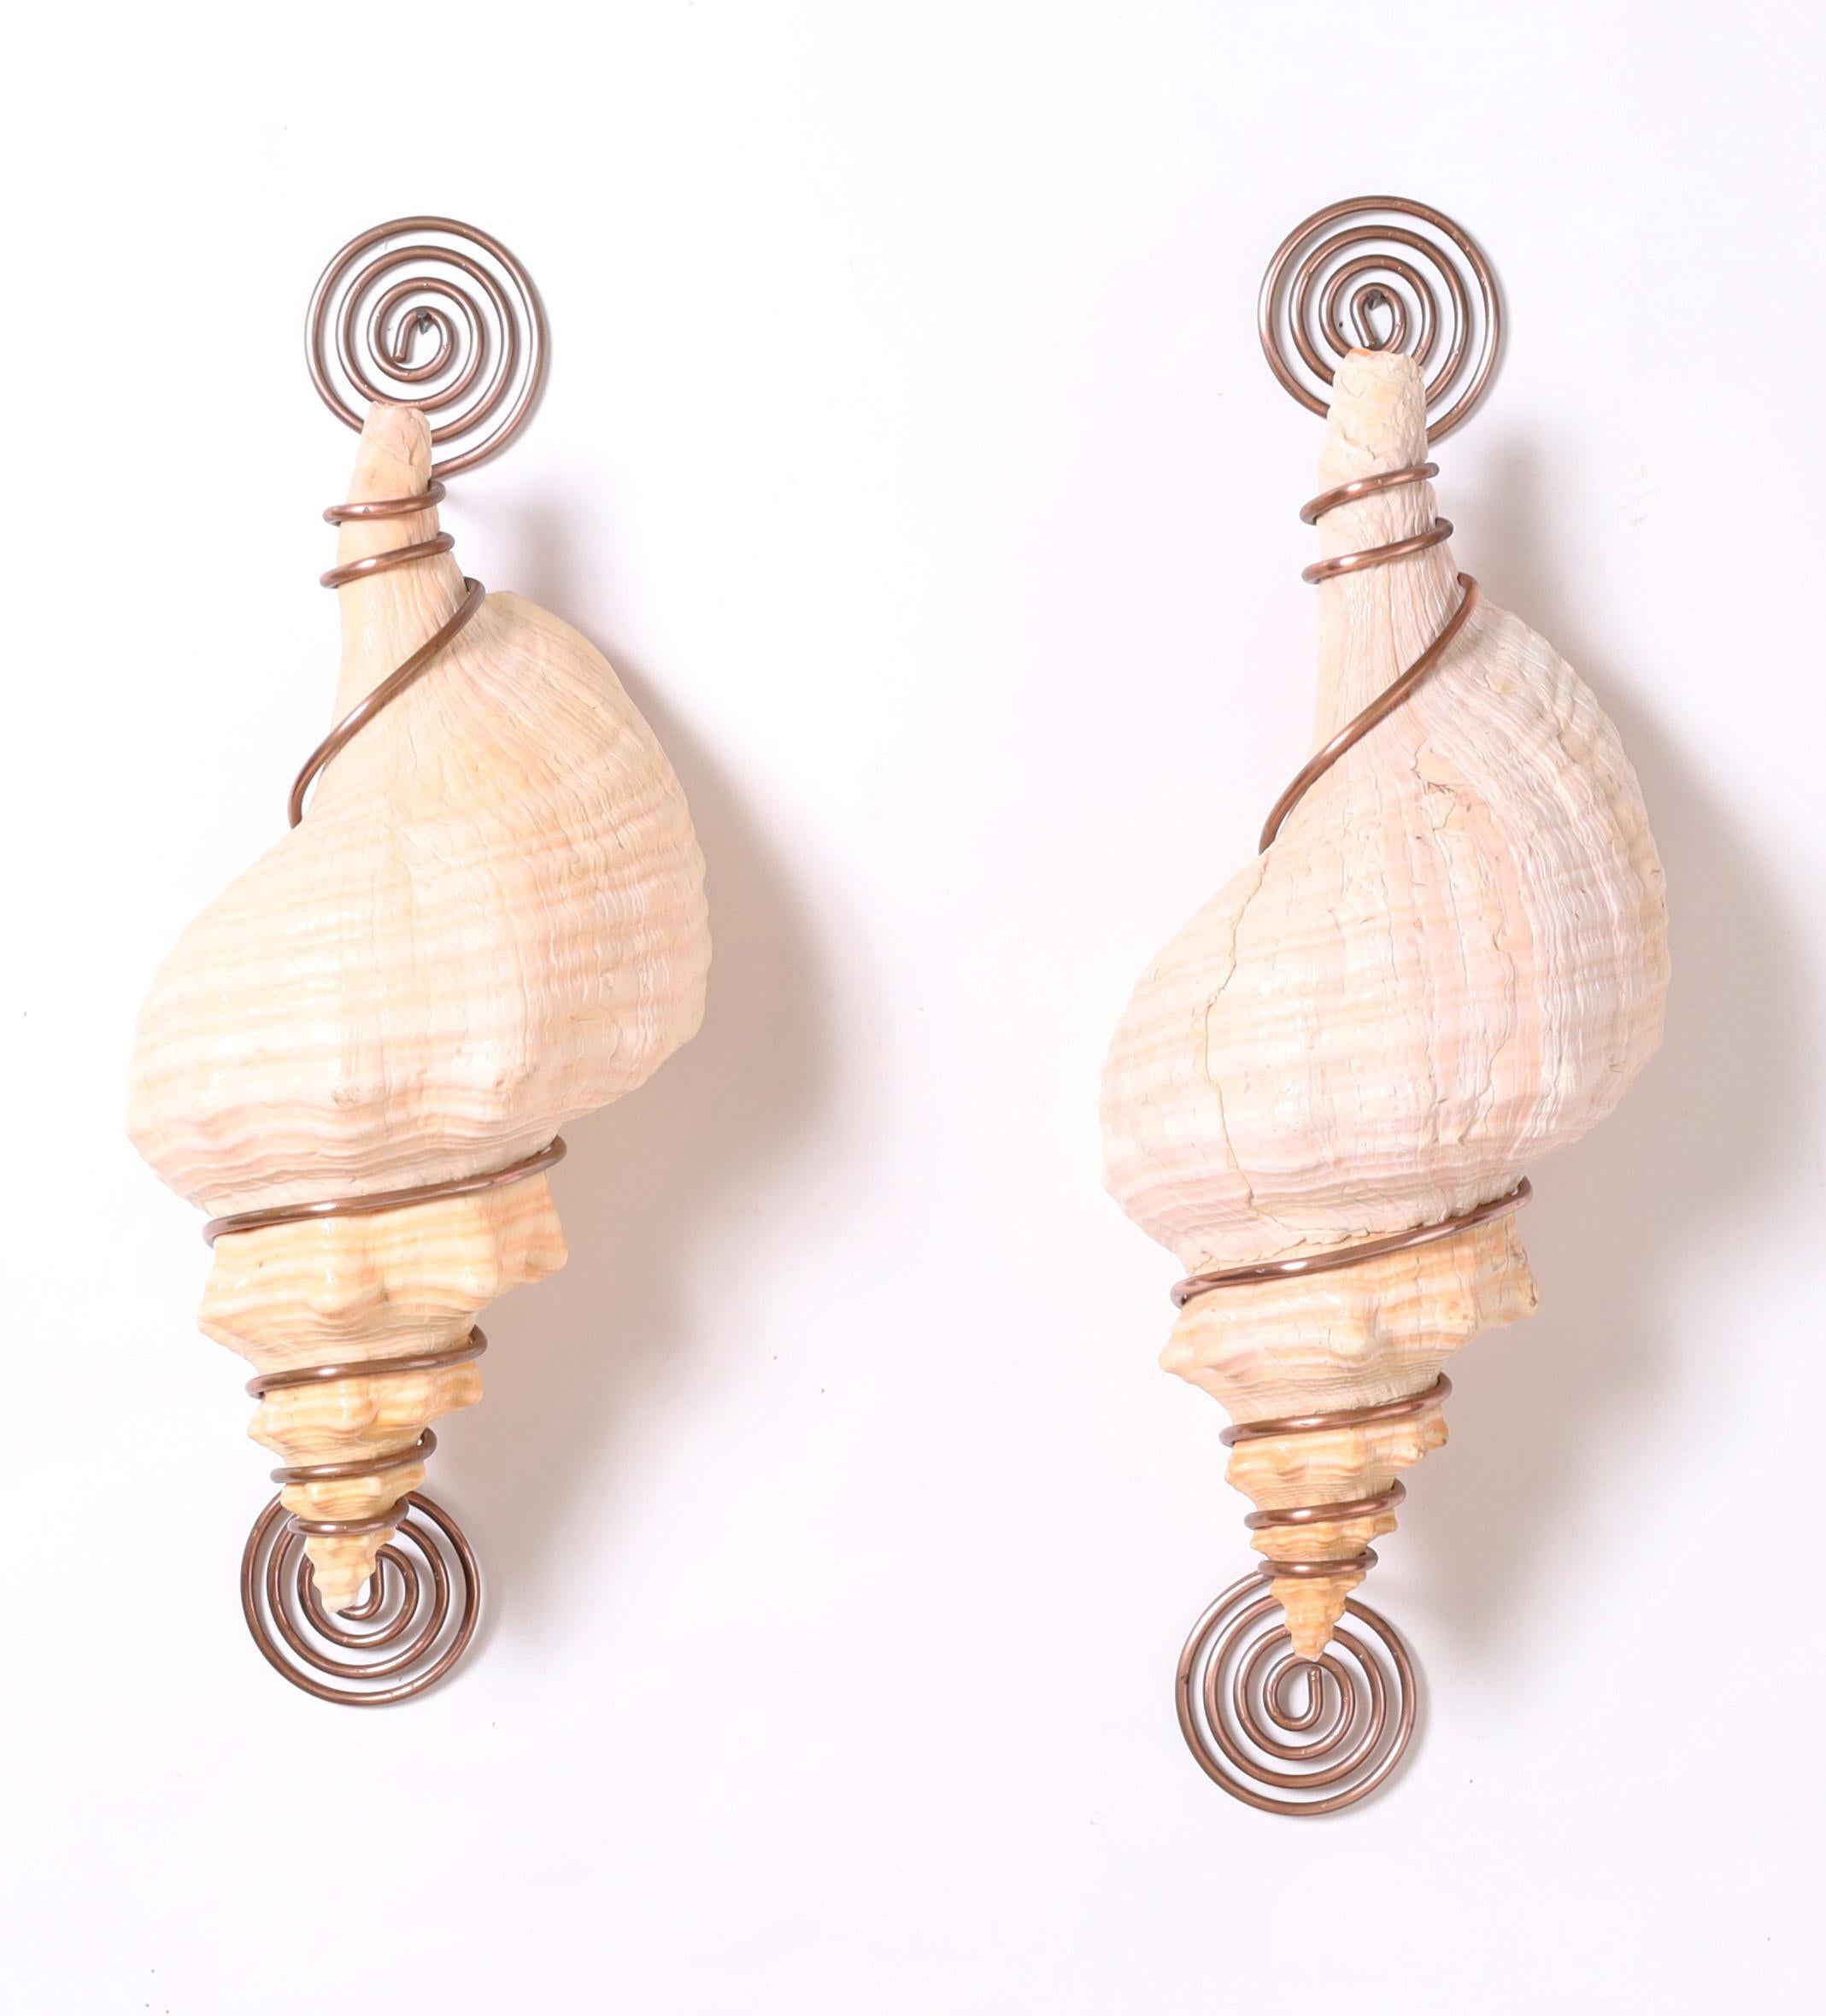 Here we have a collaboration between an artist and mother nature, a pair of conch shells wrapped in copper wire and presented on a wall in a refreshing composition enhancing both elements.